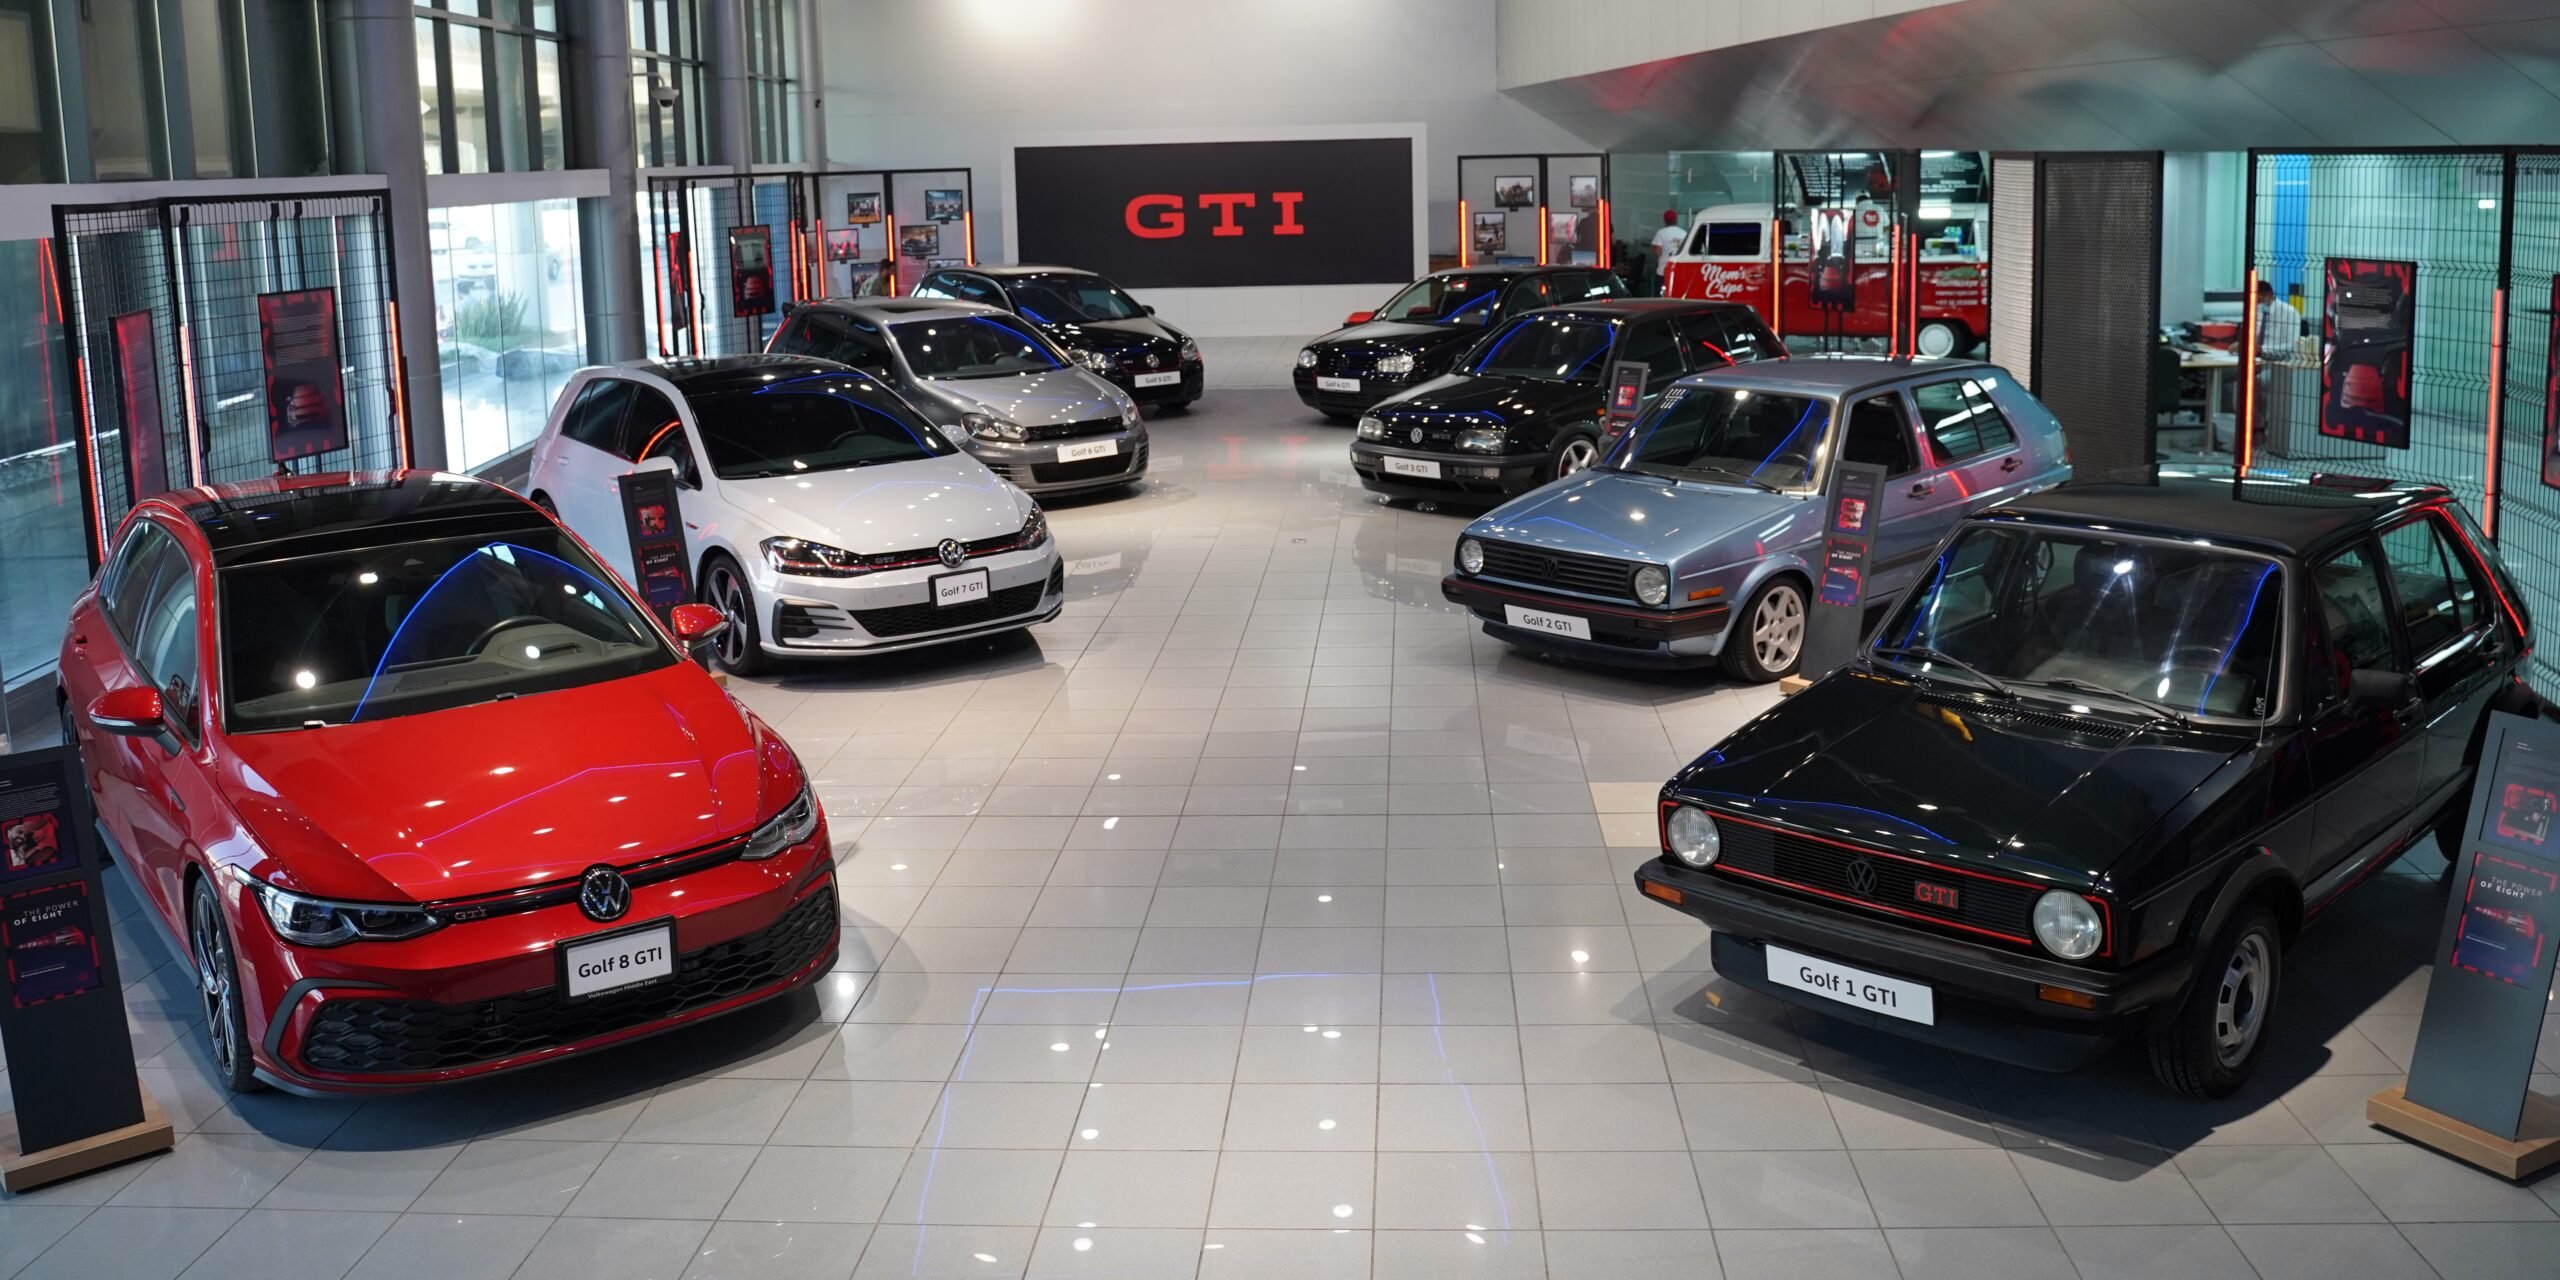 Golf GTI marks 45 years with "Power of 8" exhibition